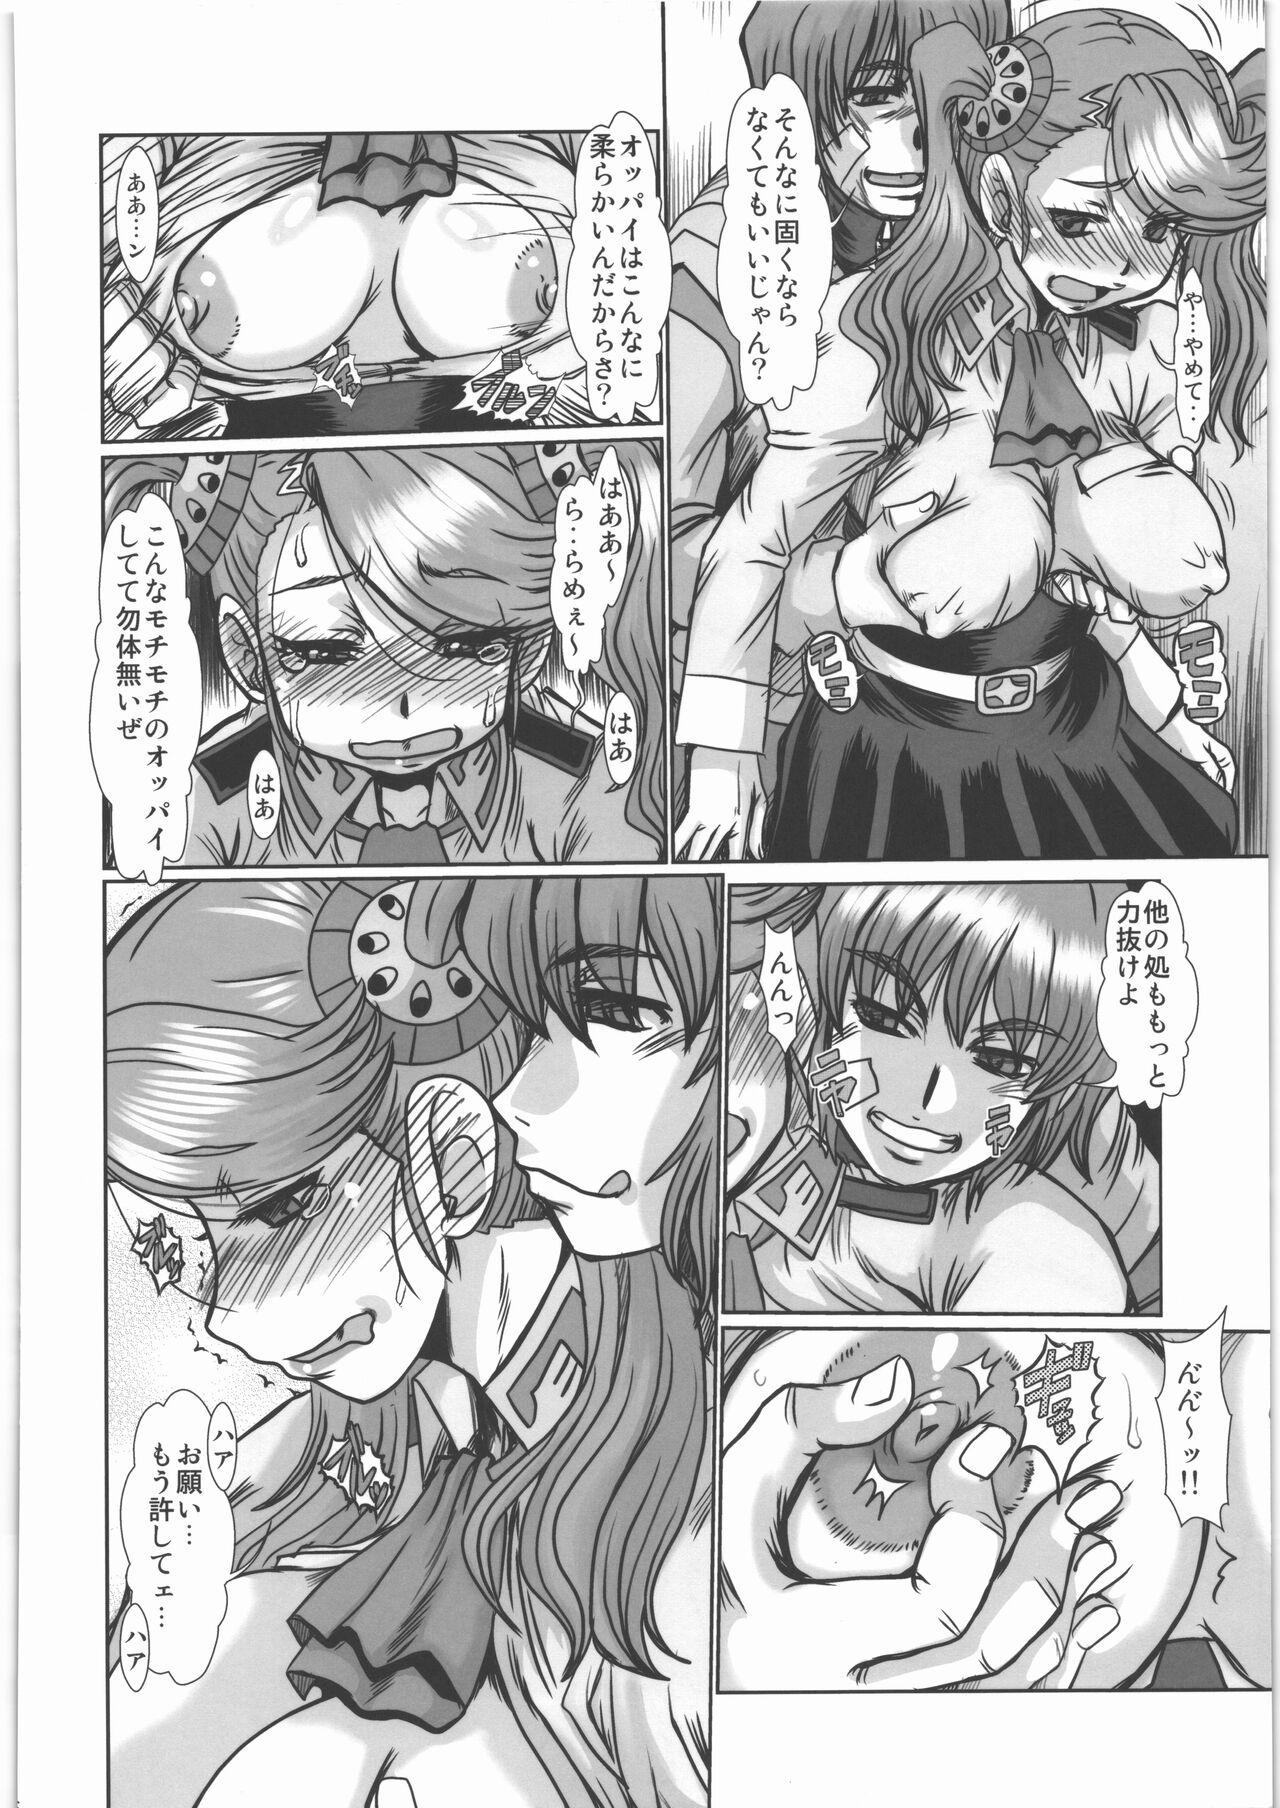 Pica F-84 - Gundam build fighters try 8teen - Page 5